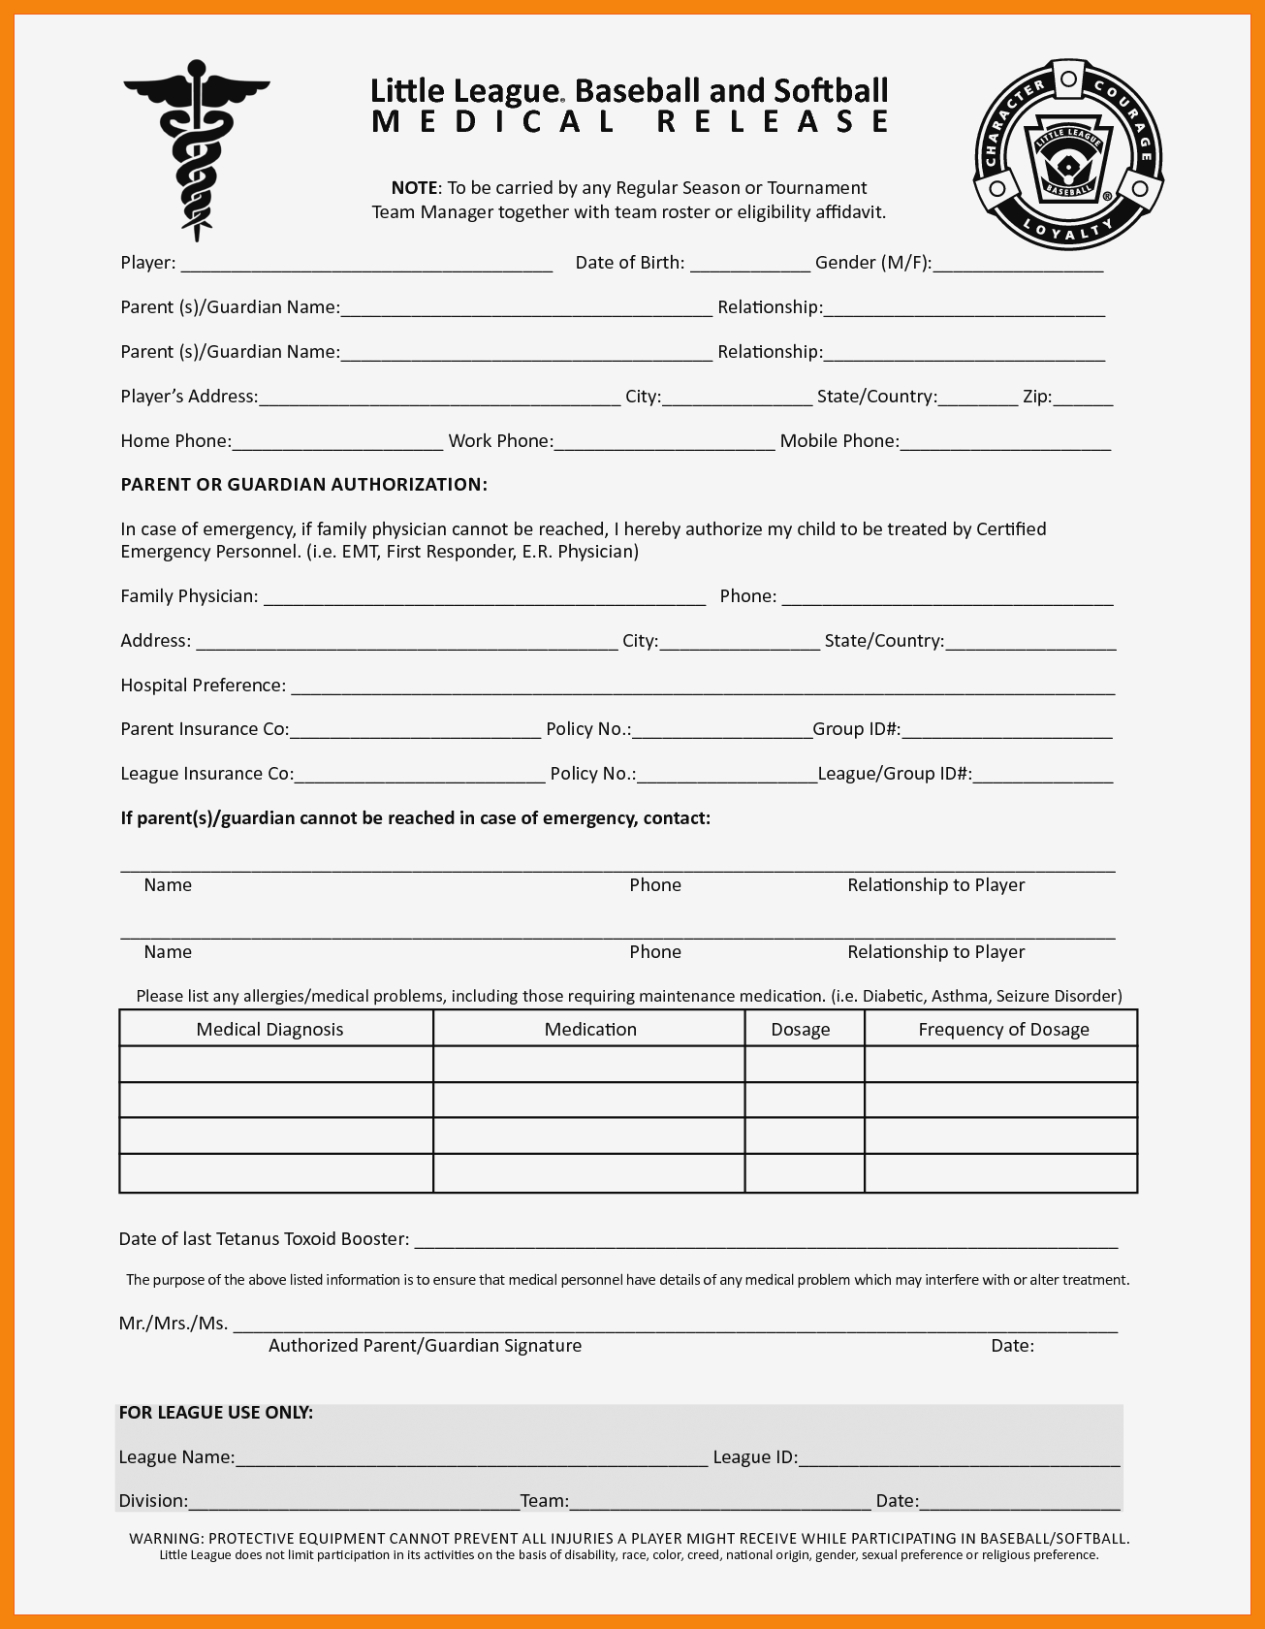 easy-printable-medical-form-printable-forms-free-online